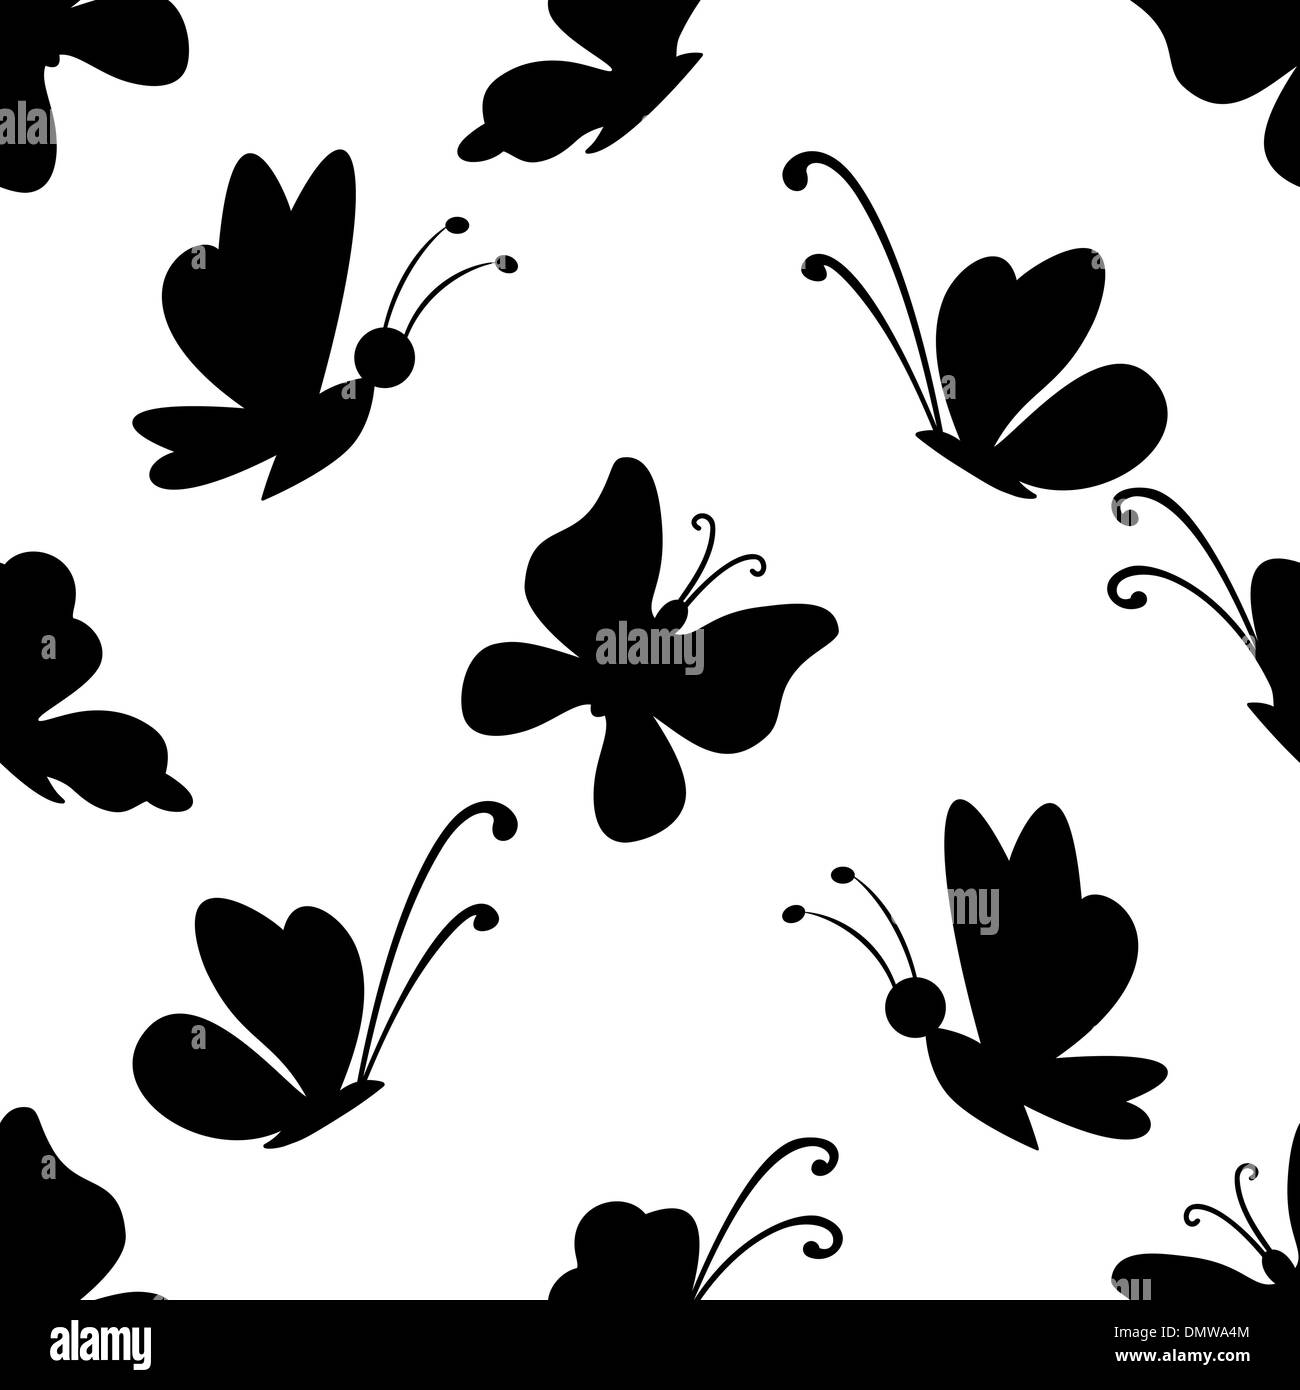 Background, butterflies silhouettes Stock Vector